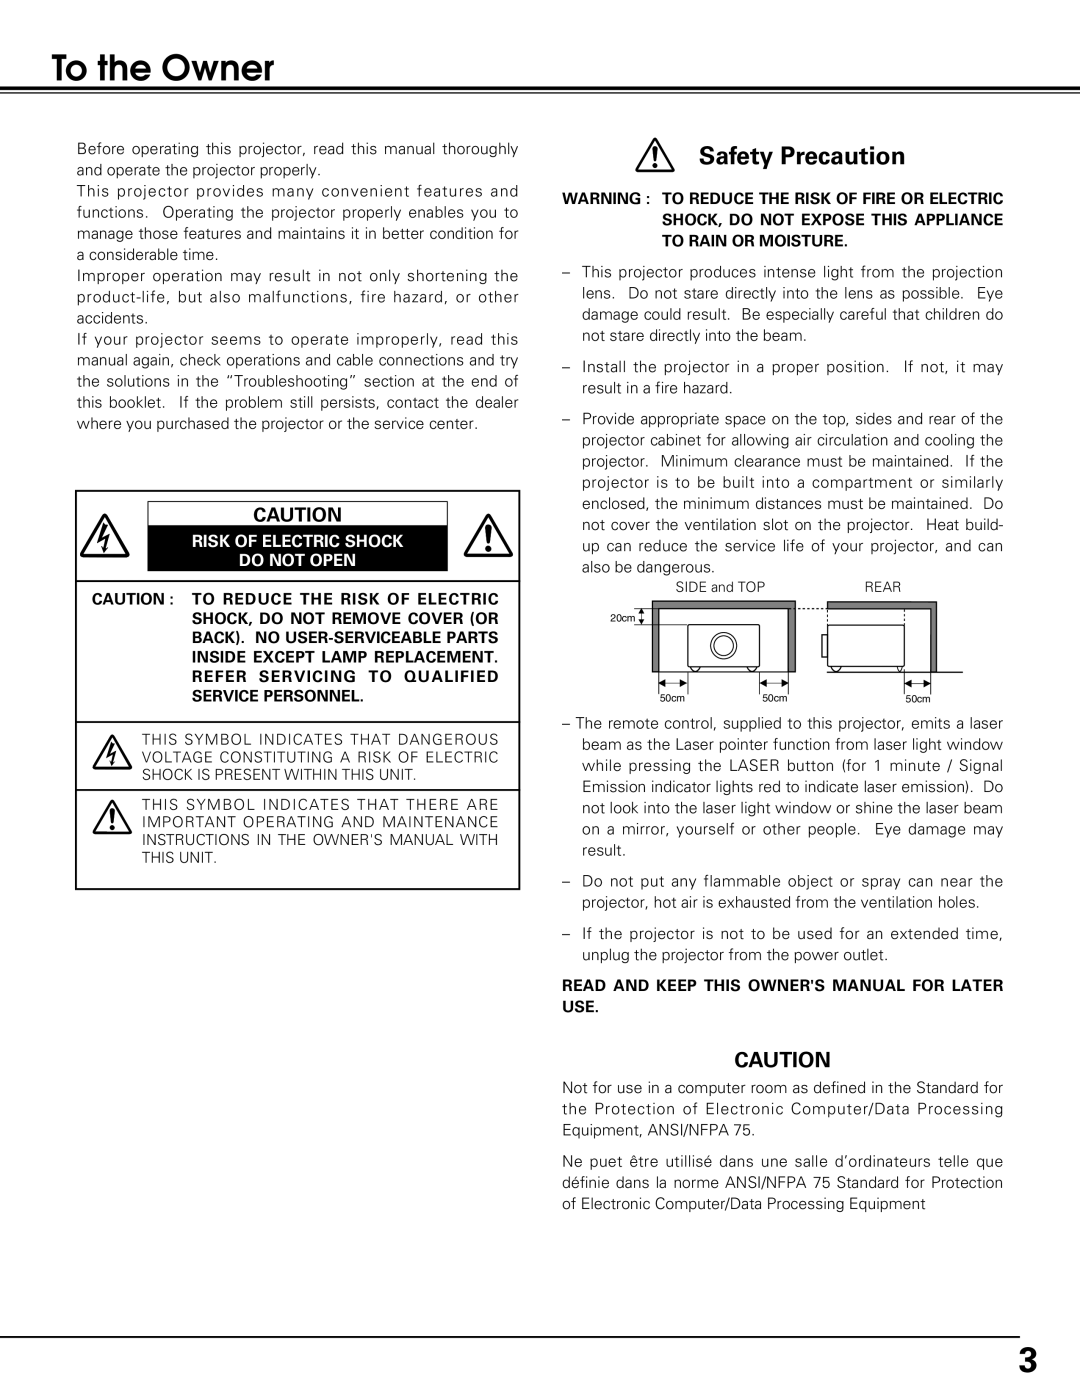 Black Box LC-XE10 instruction manual To the Owner, Safety Precaution, Risk Of Electric Shock Do Not Open 